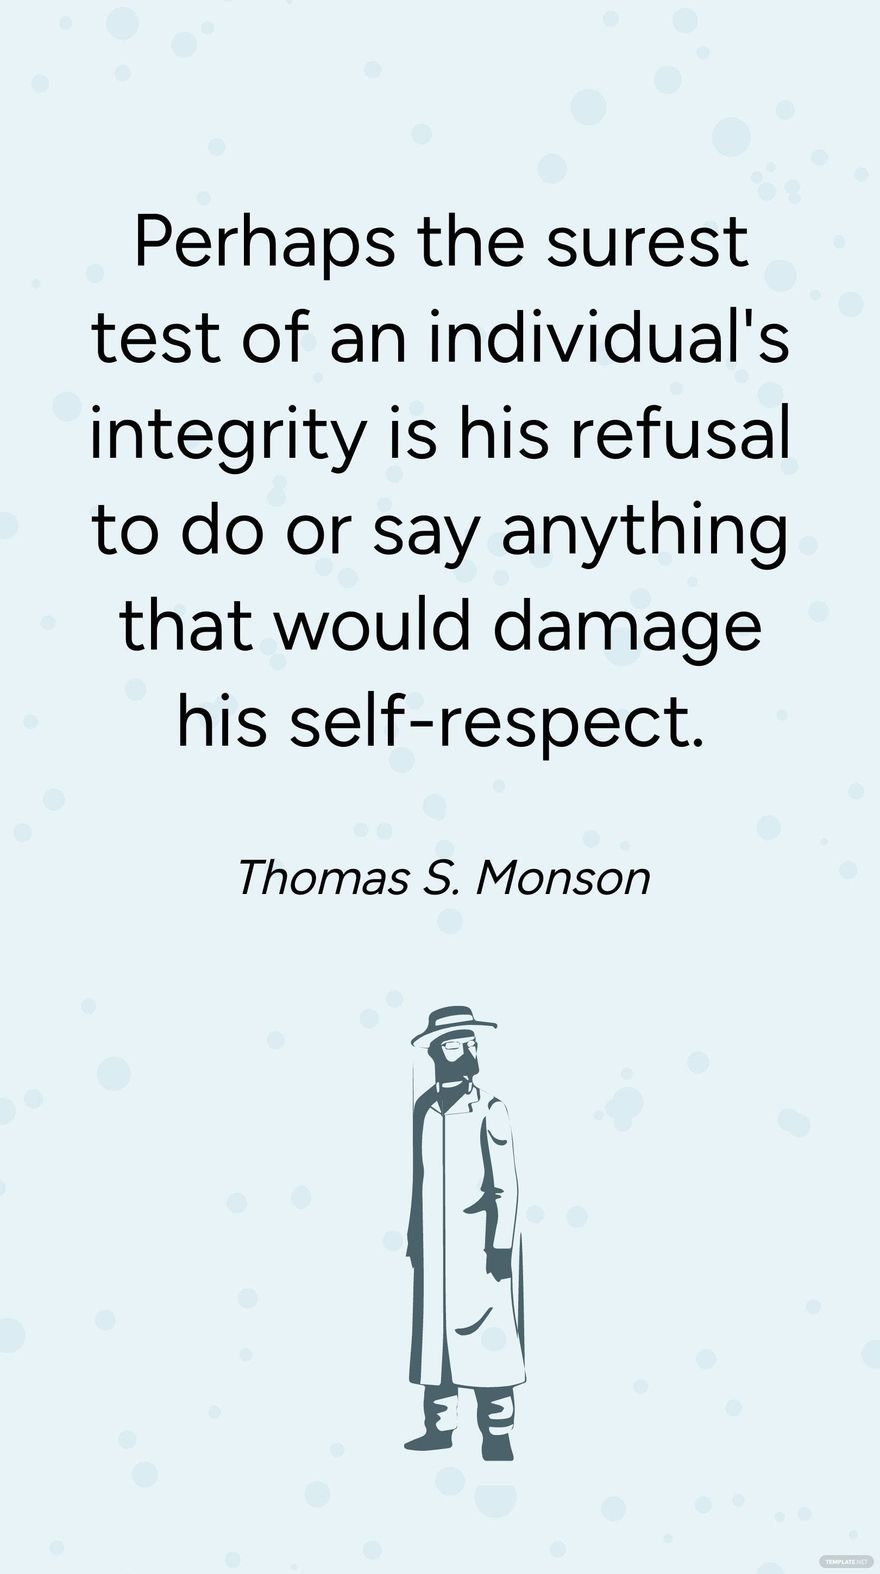 Thomas S. Monson - Perhaps the surest test of an individual's integrity is his refusal to do or say anything that would damage his self-respect.